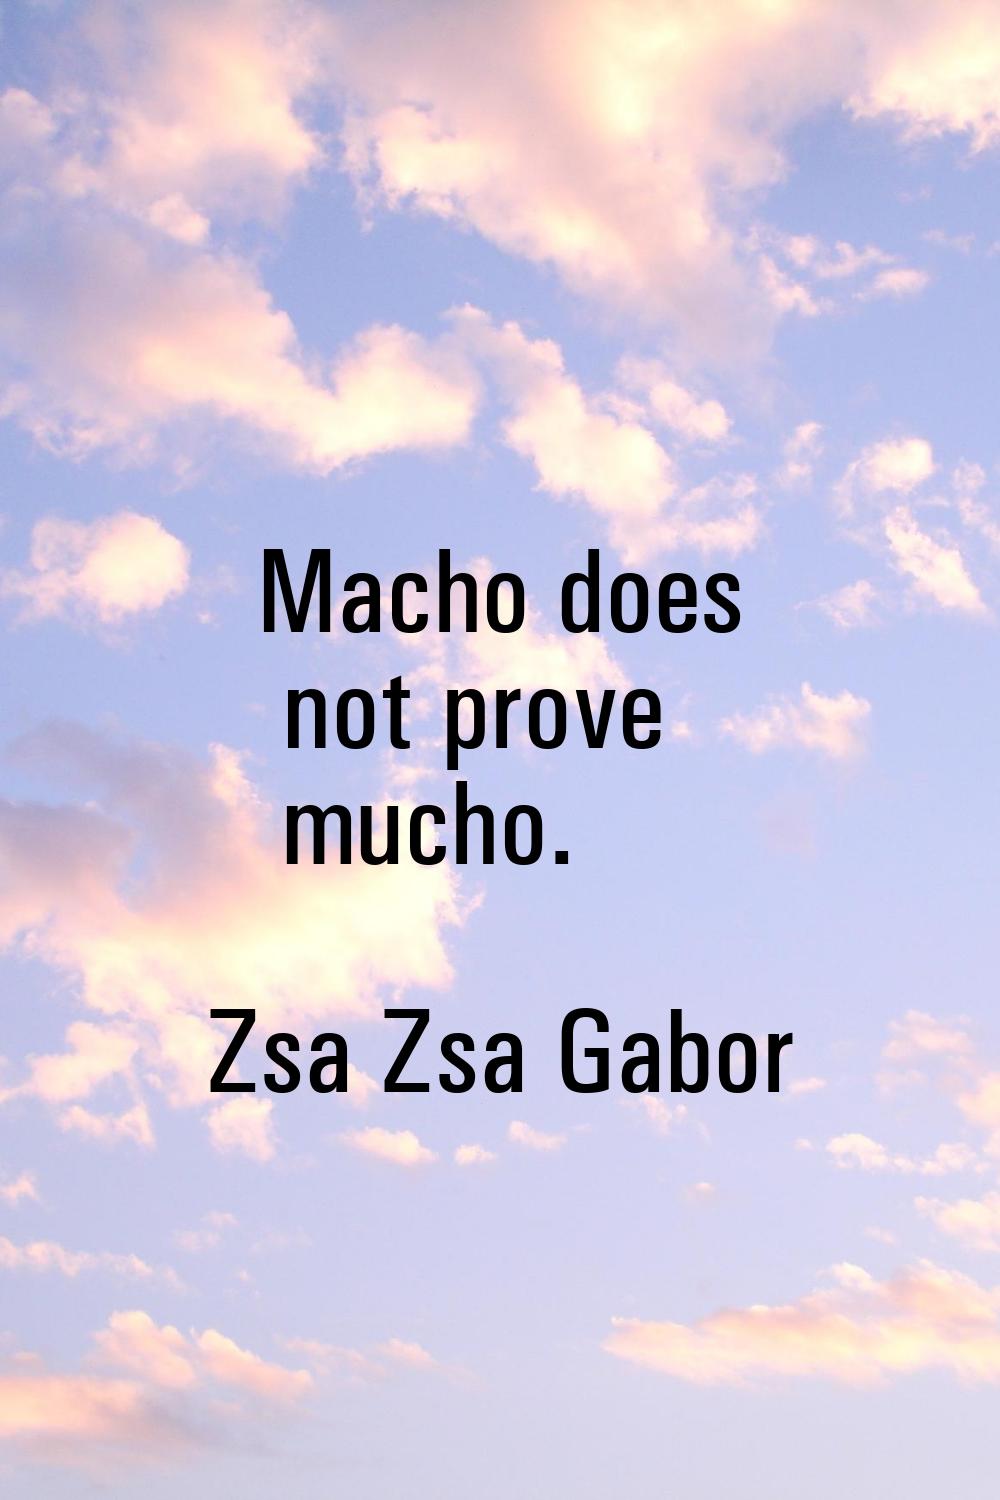 Macho does not prove mucho.